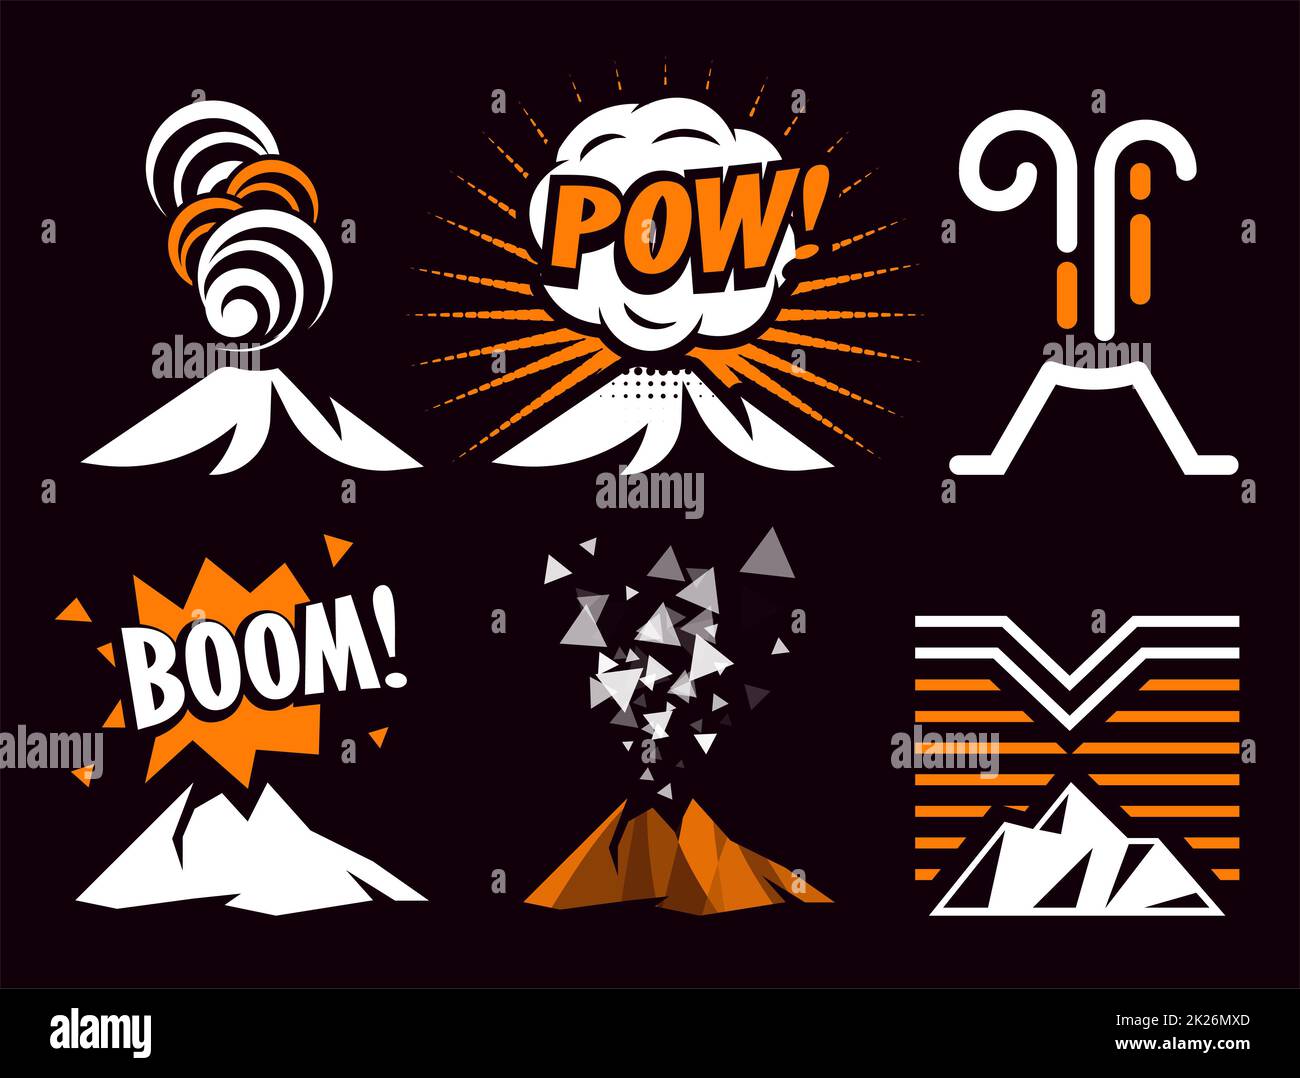 Volcano magma eruptio icon collection. Spectacular natural phenomenon painted in cartoon style set. Volcanic toxic clouds and mountain logo. Graphic anger metaphor illustration. Stock Photo